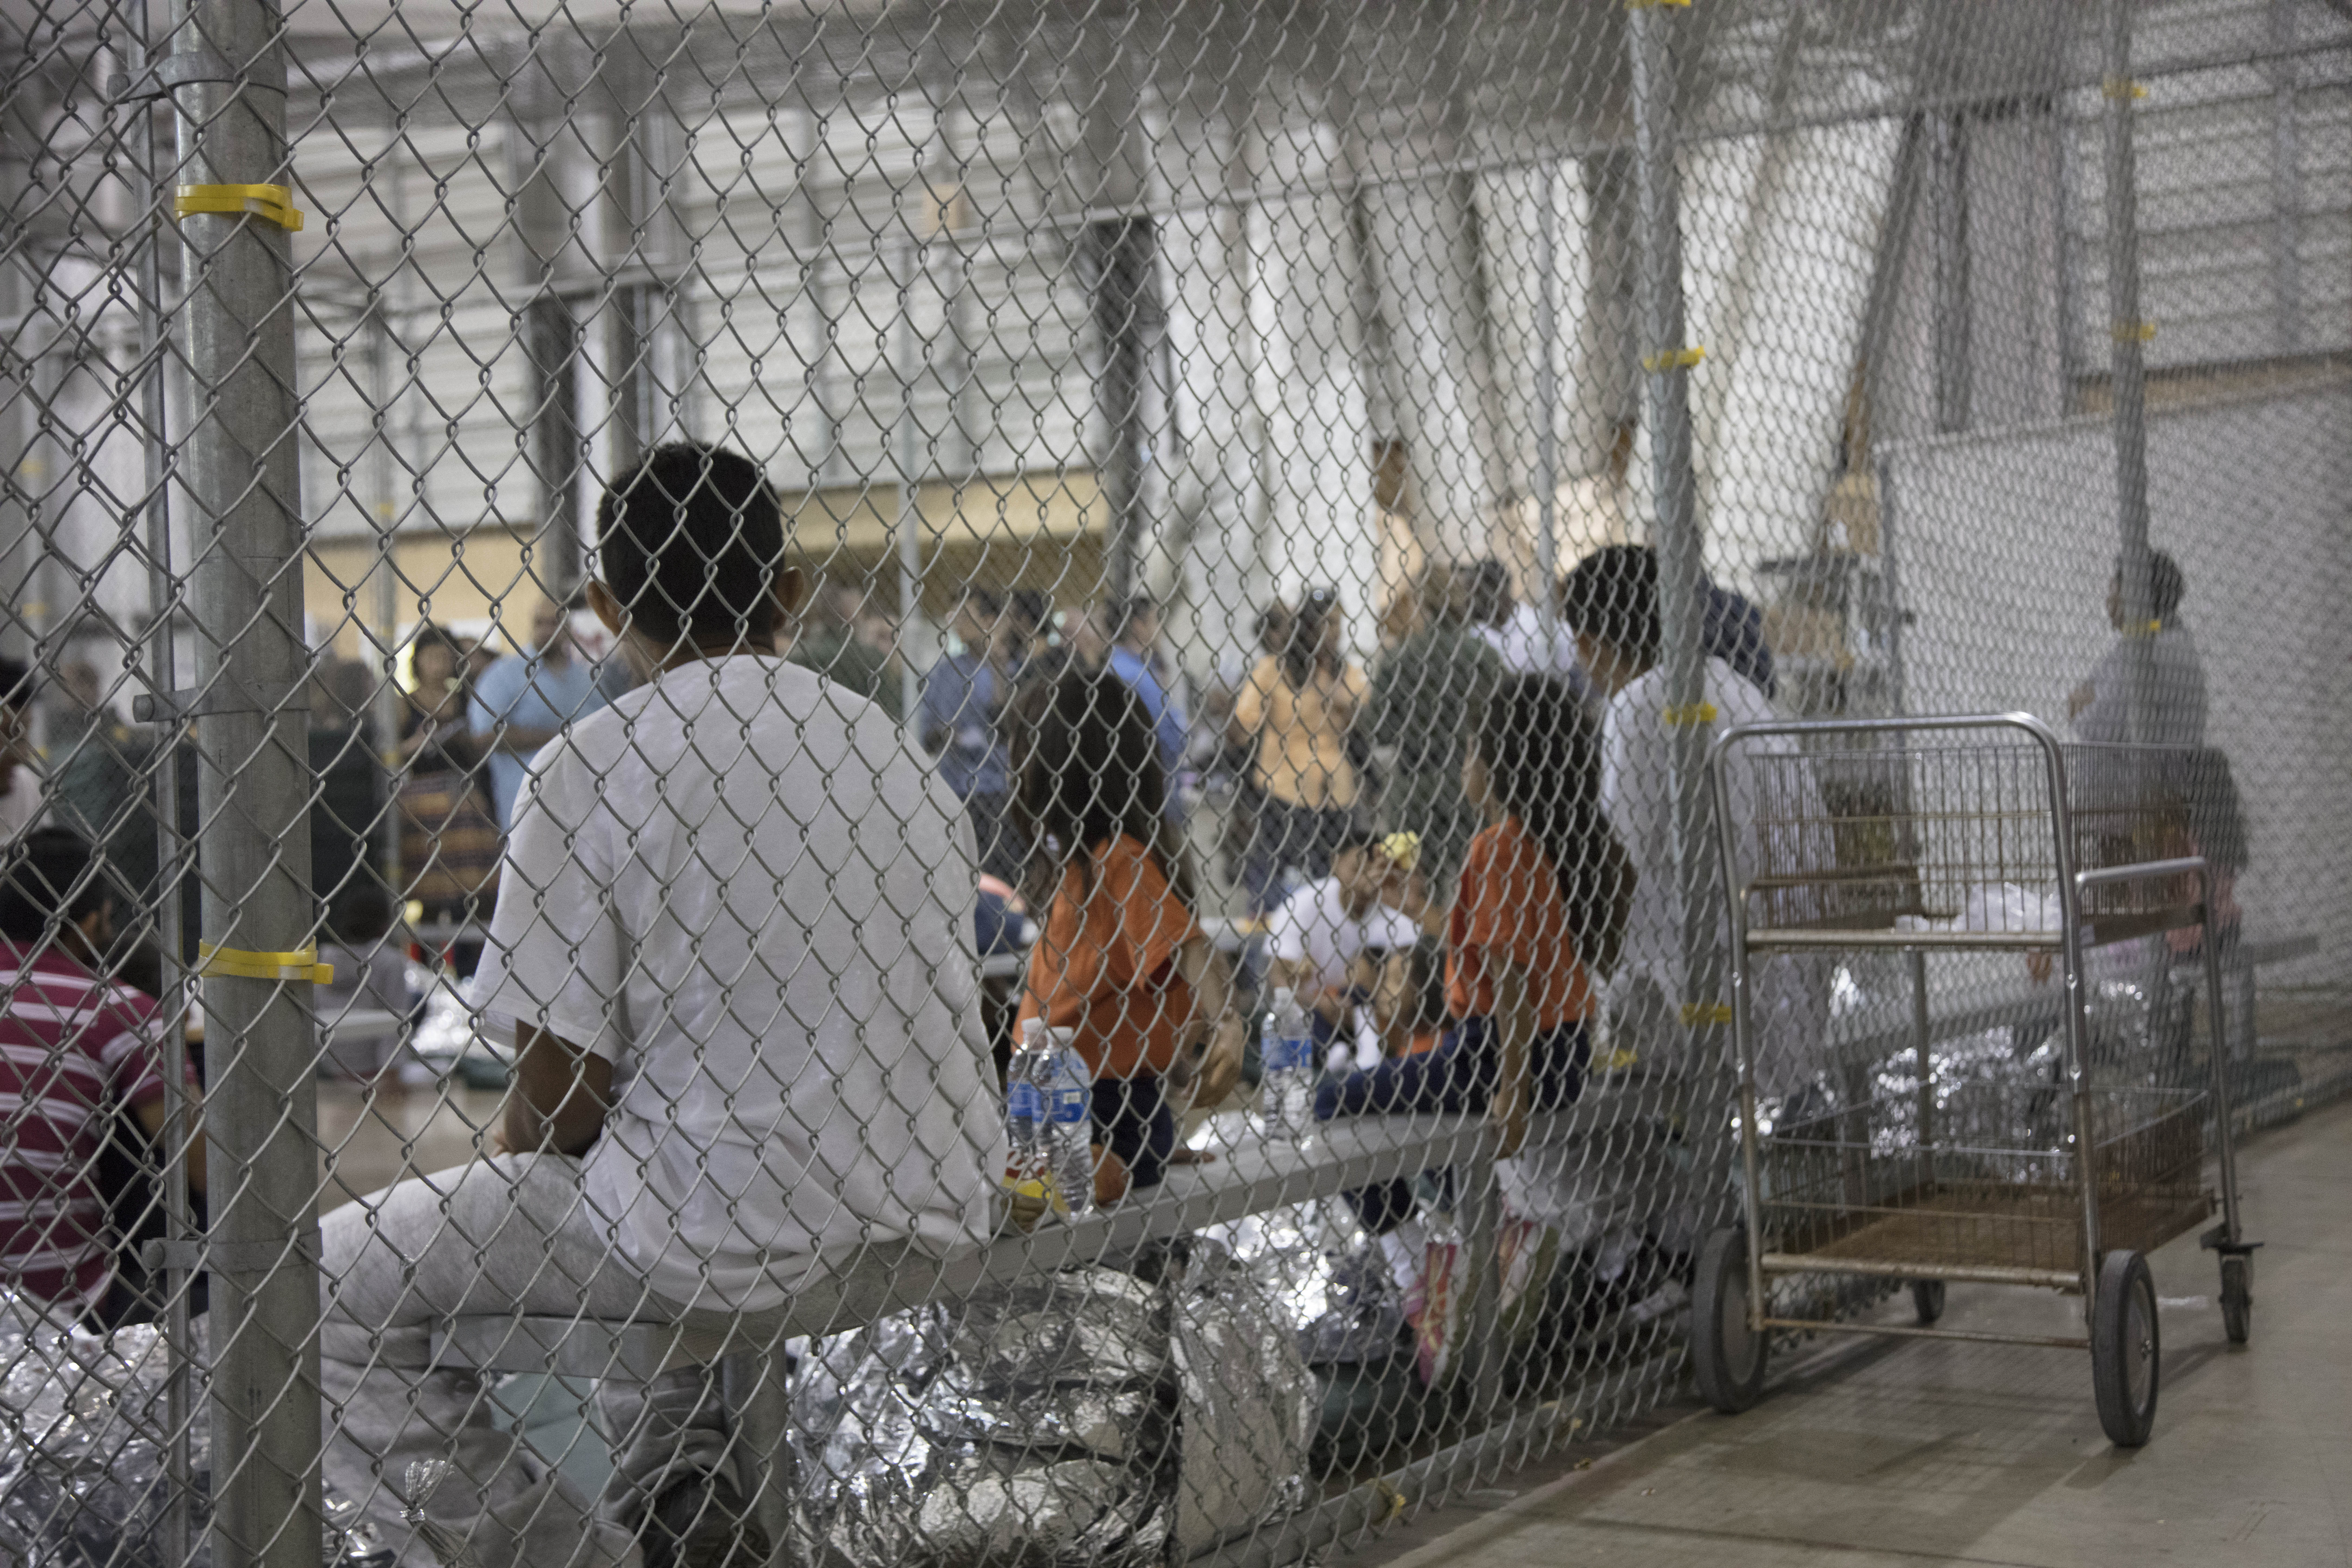 UN study finds US has highest rate of children in detention